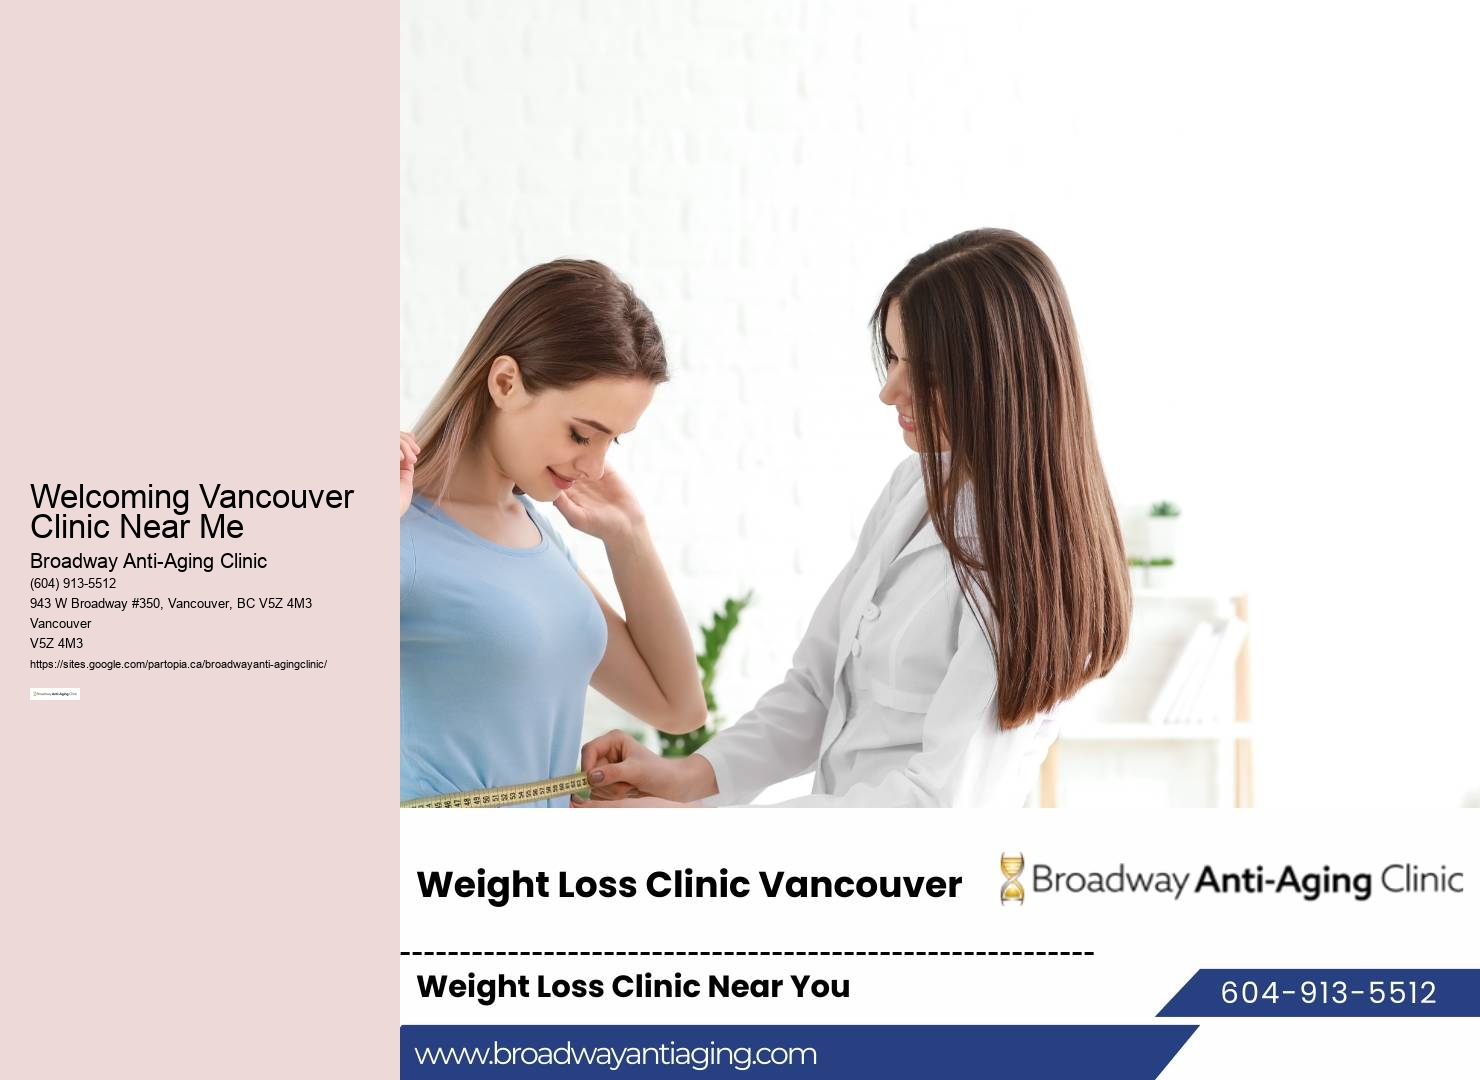 Welcoming Vancouver Clinic Near Me